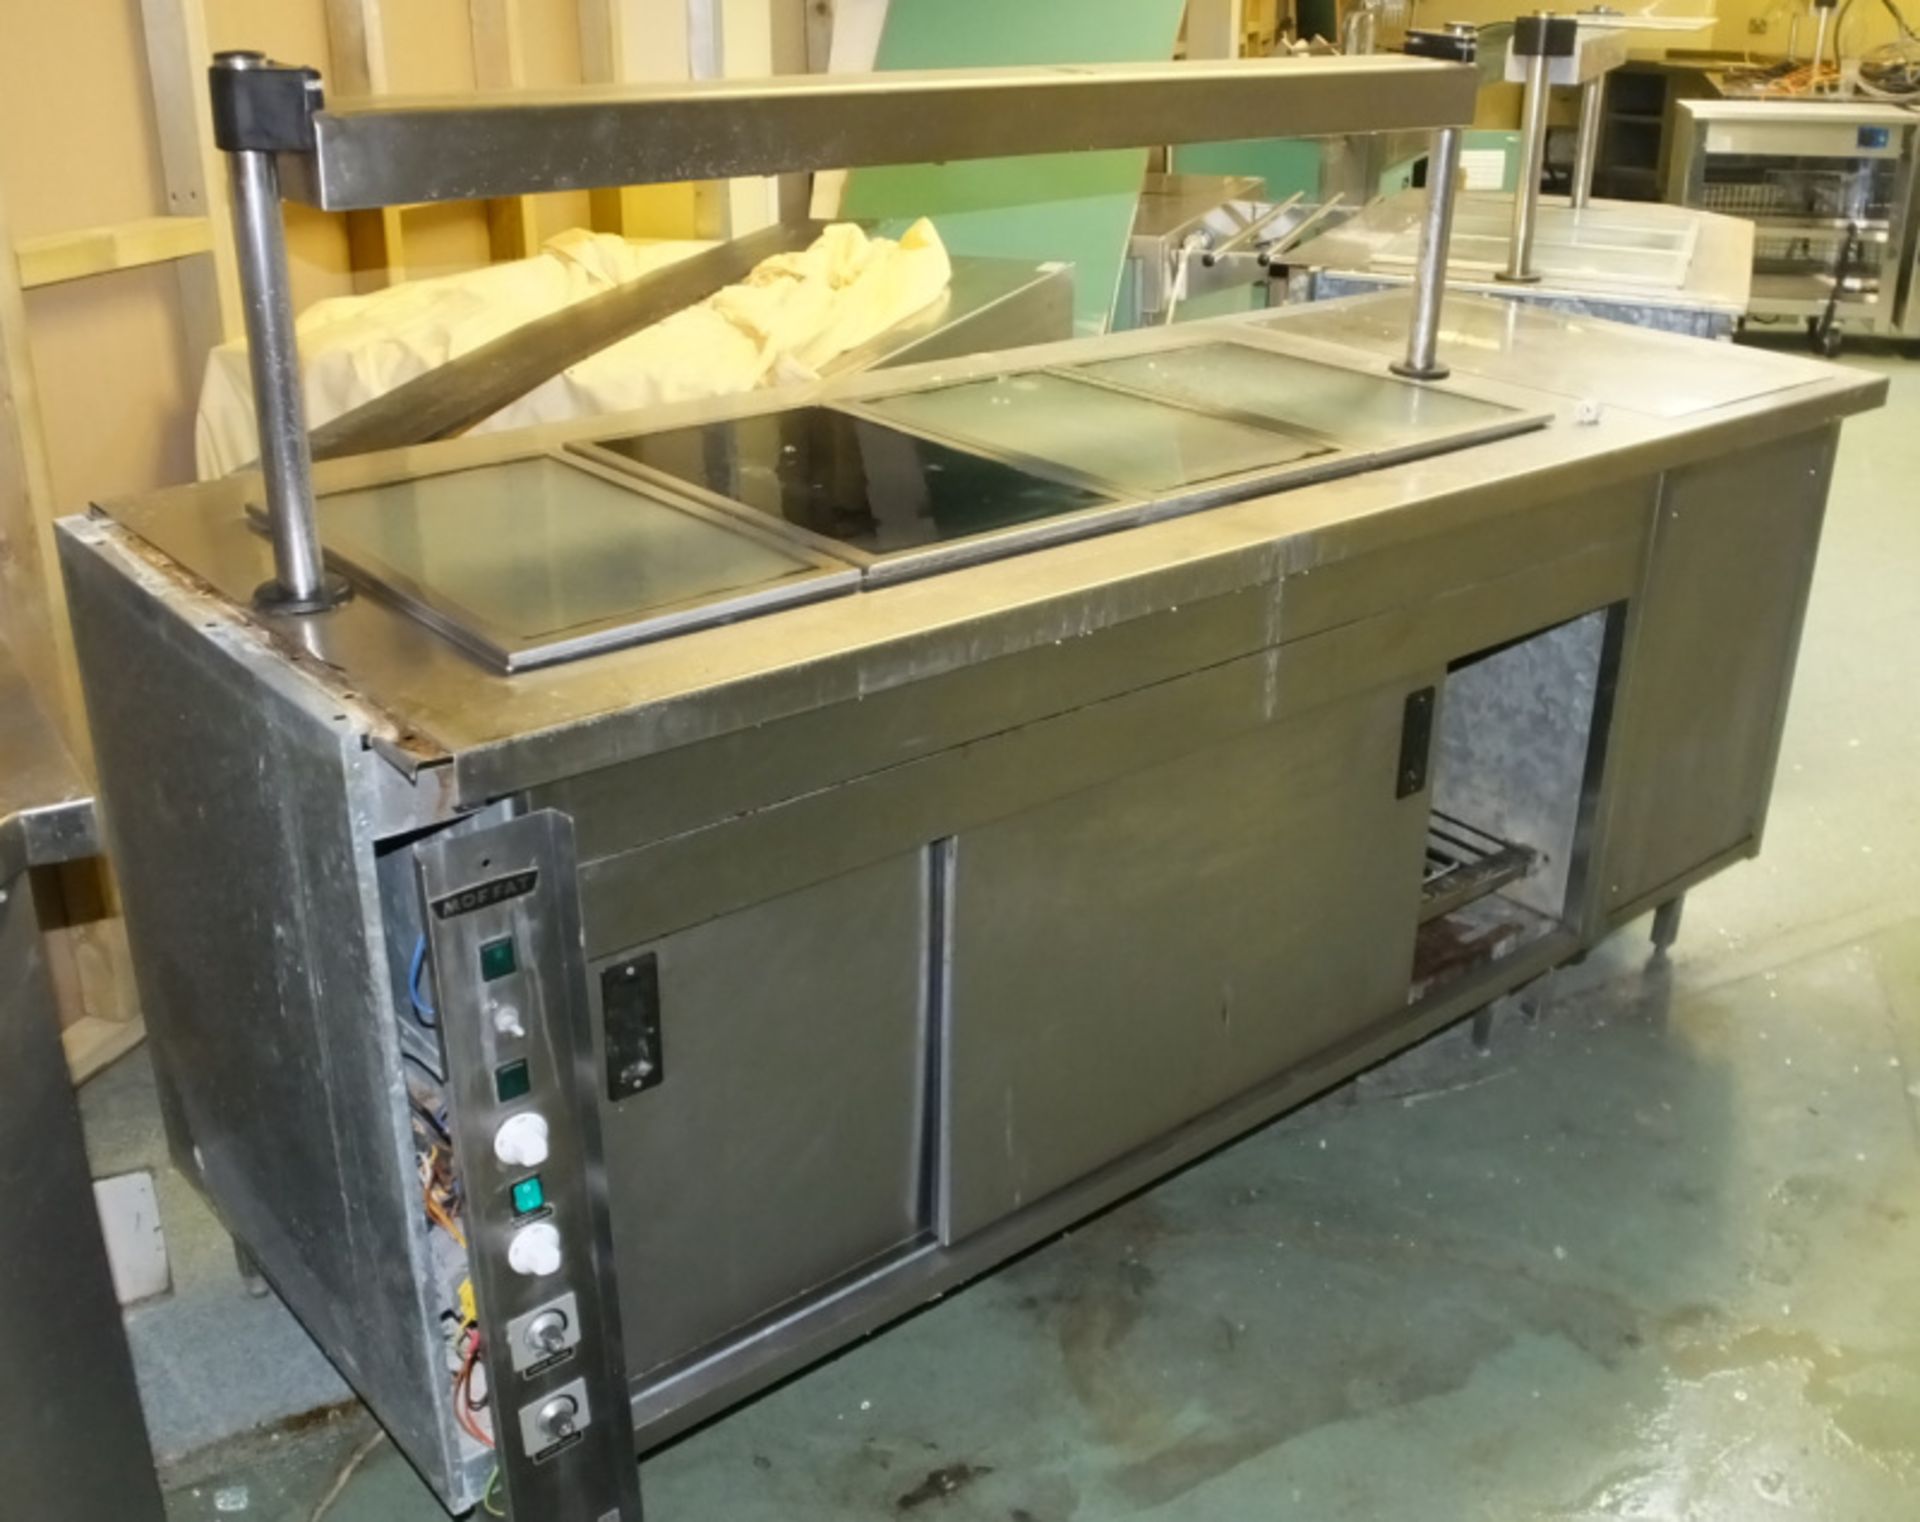 3x Moffat Stainless Steel Hot Plate Servery Units - Details & dimensions in the description - Image 4 of 14